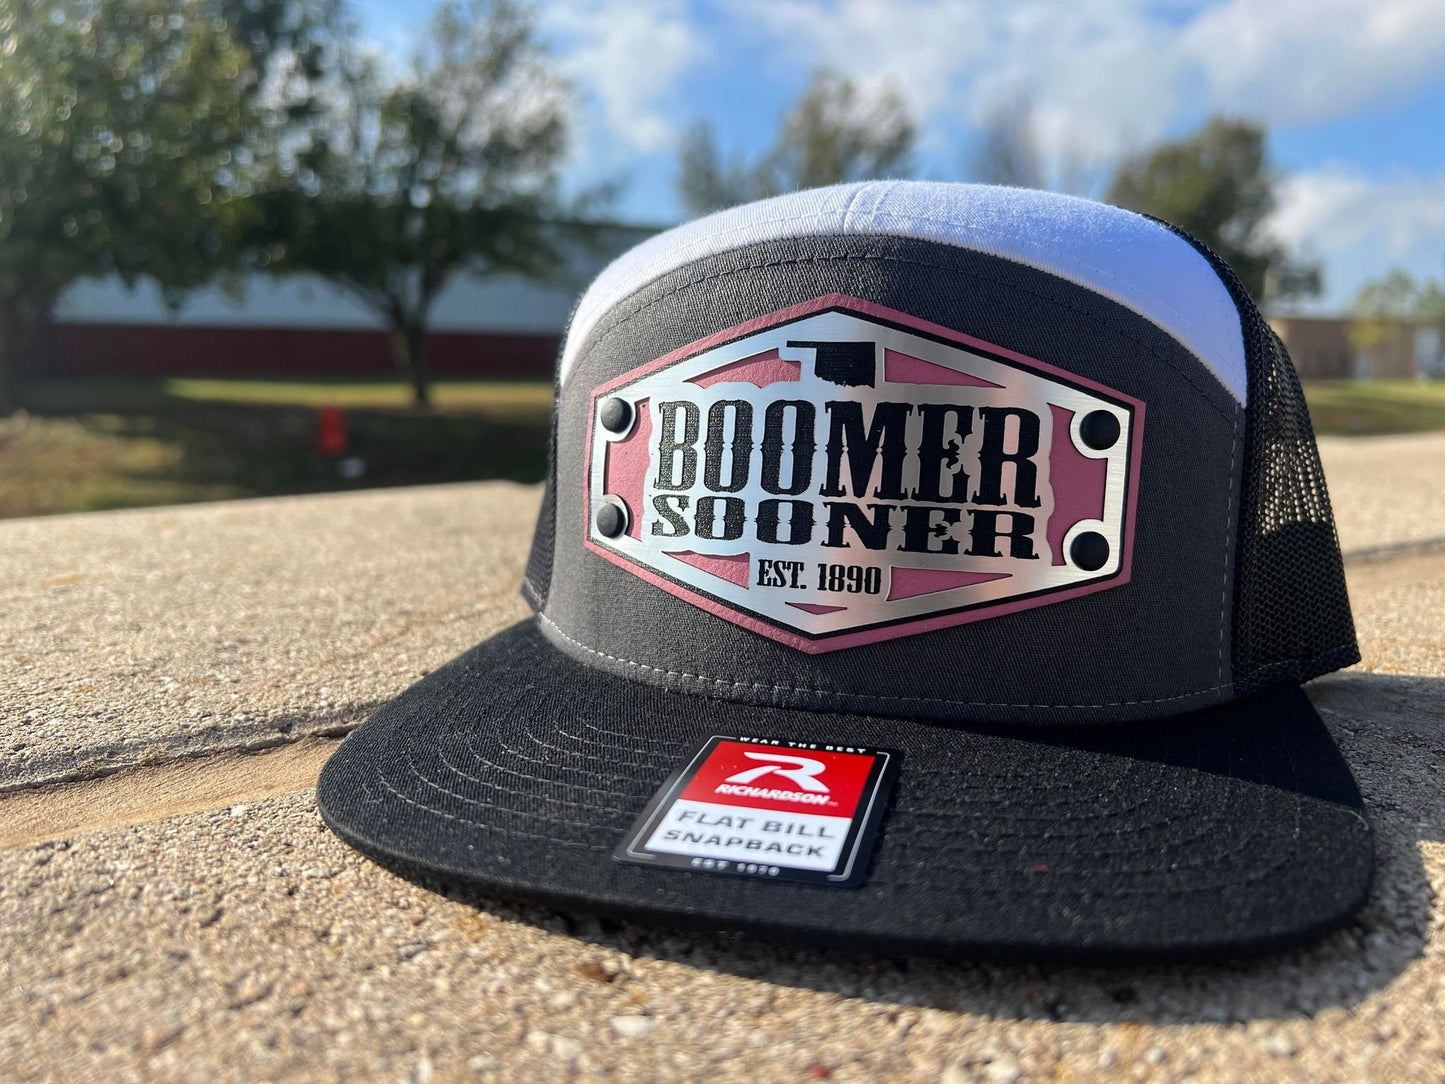 BOOMER SOONER Oklahoma Trucker Flatbill Hat - Leather Patch, Laser Engraved Emblem - Vintage Style - Perfect for Sports Fans!